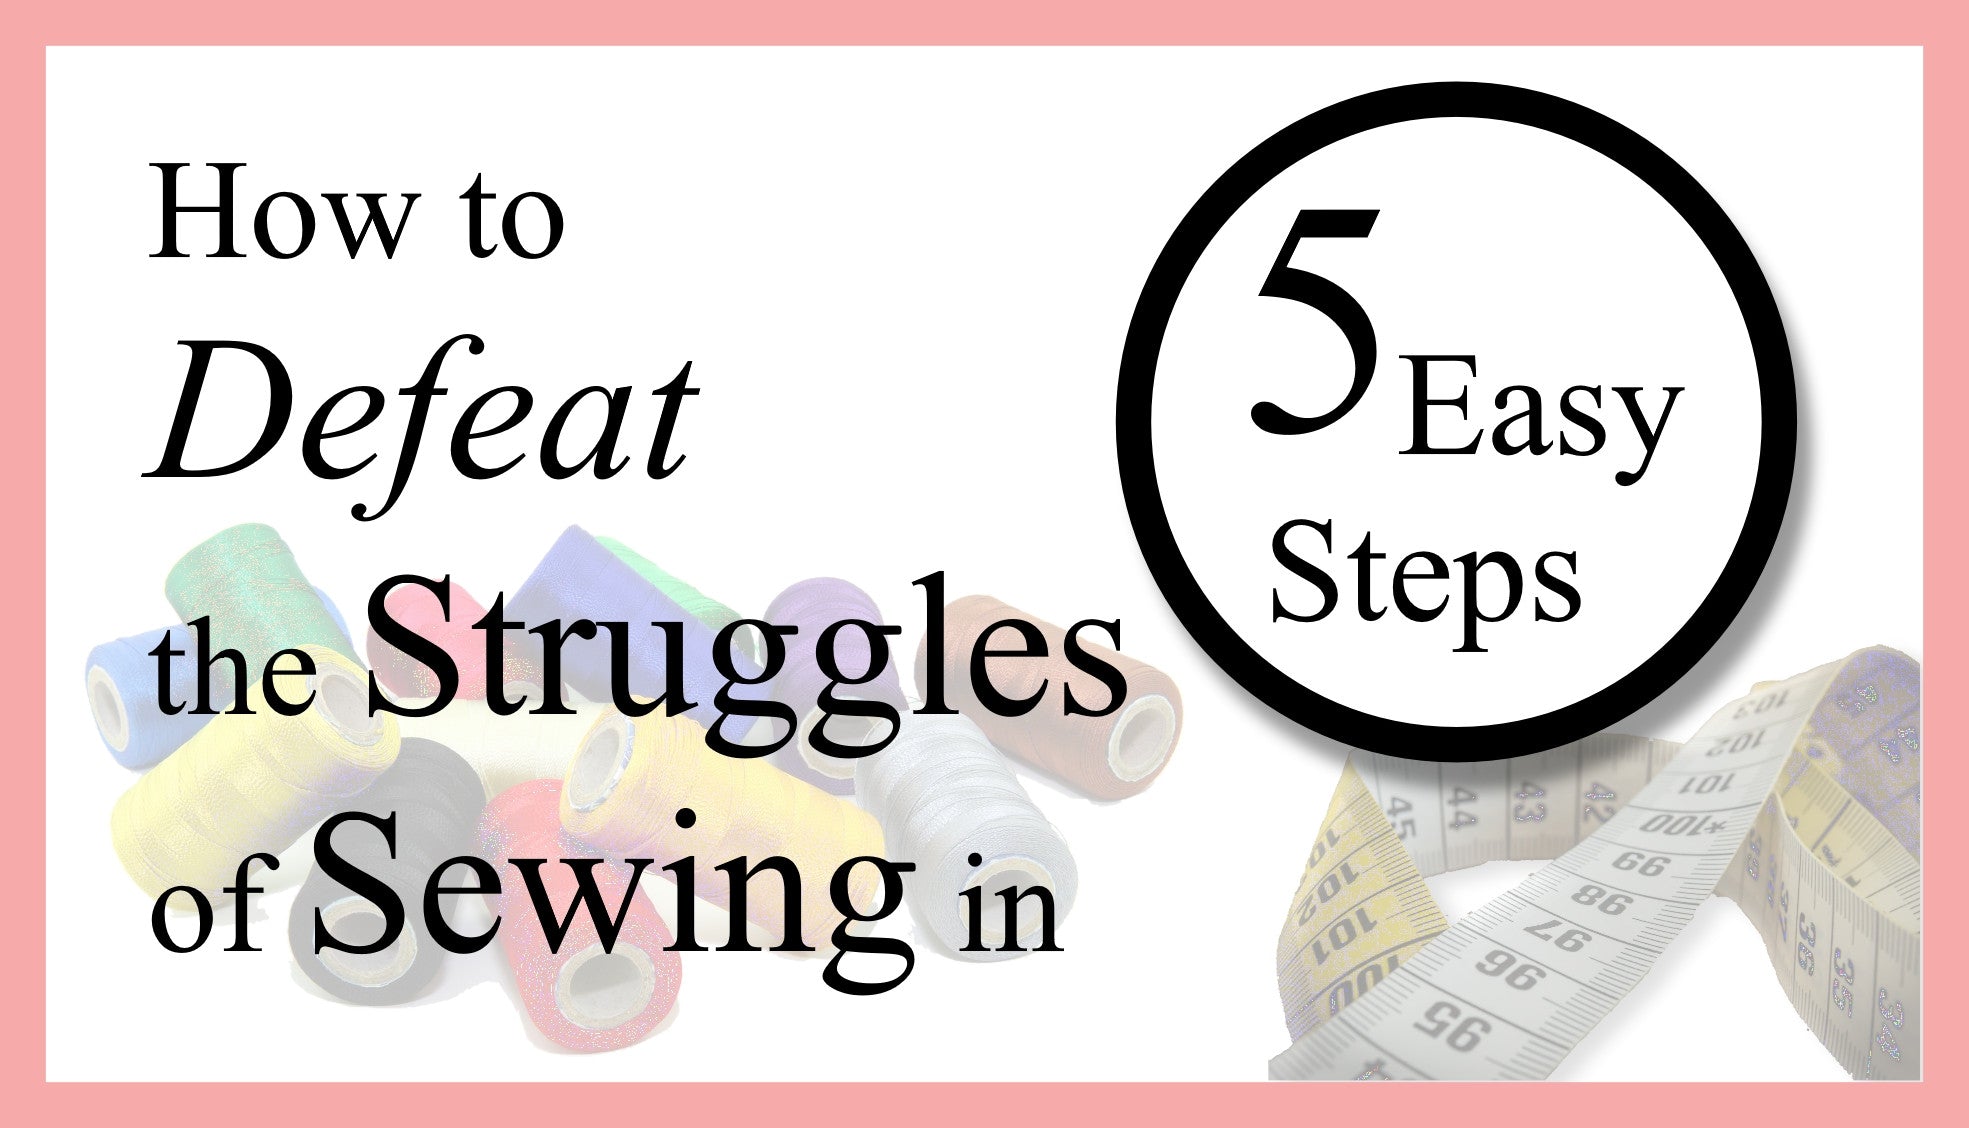 How to Defeat the Struggles of Sewing in 5 Easy Steps